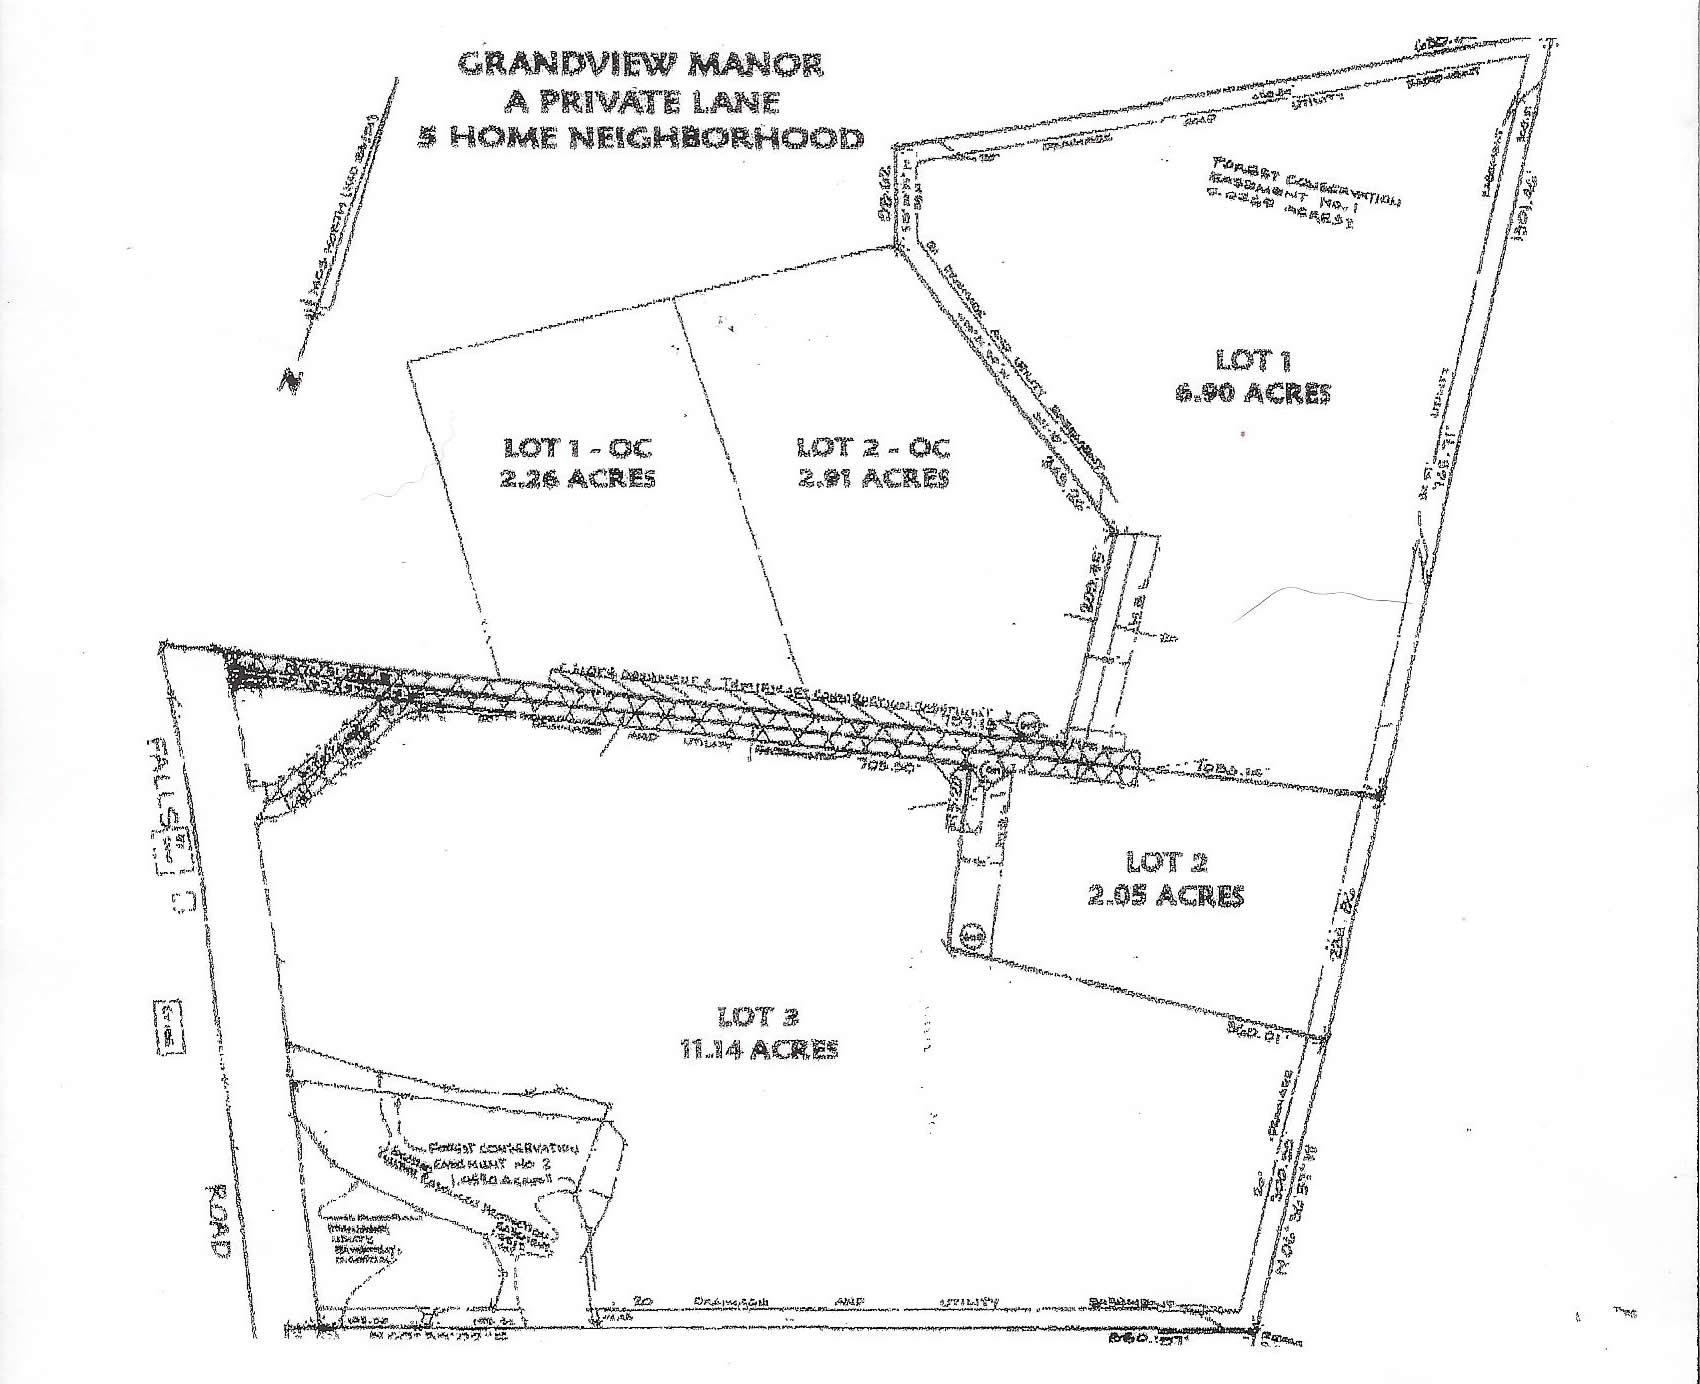 Site Plan for Grandview Manor